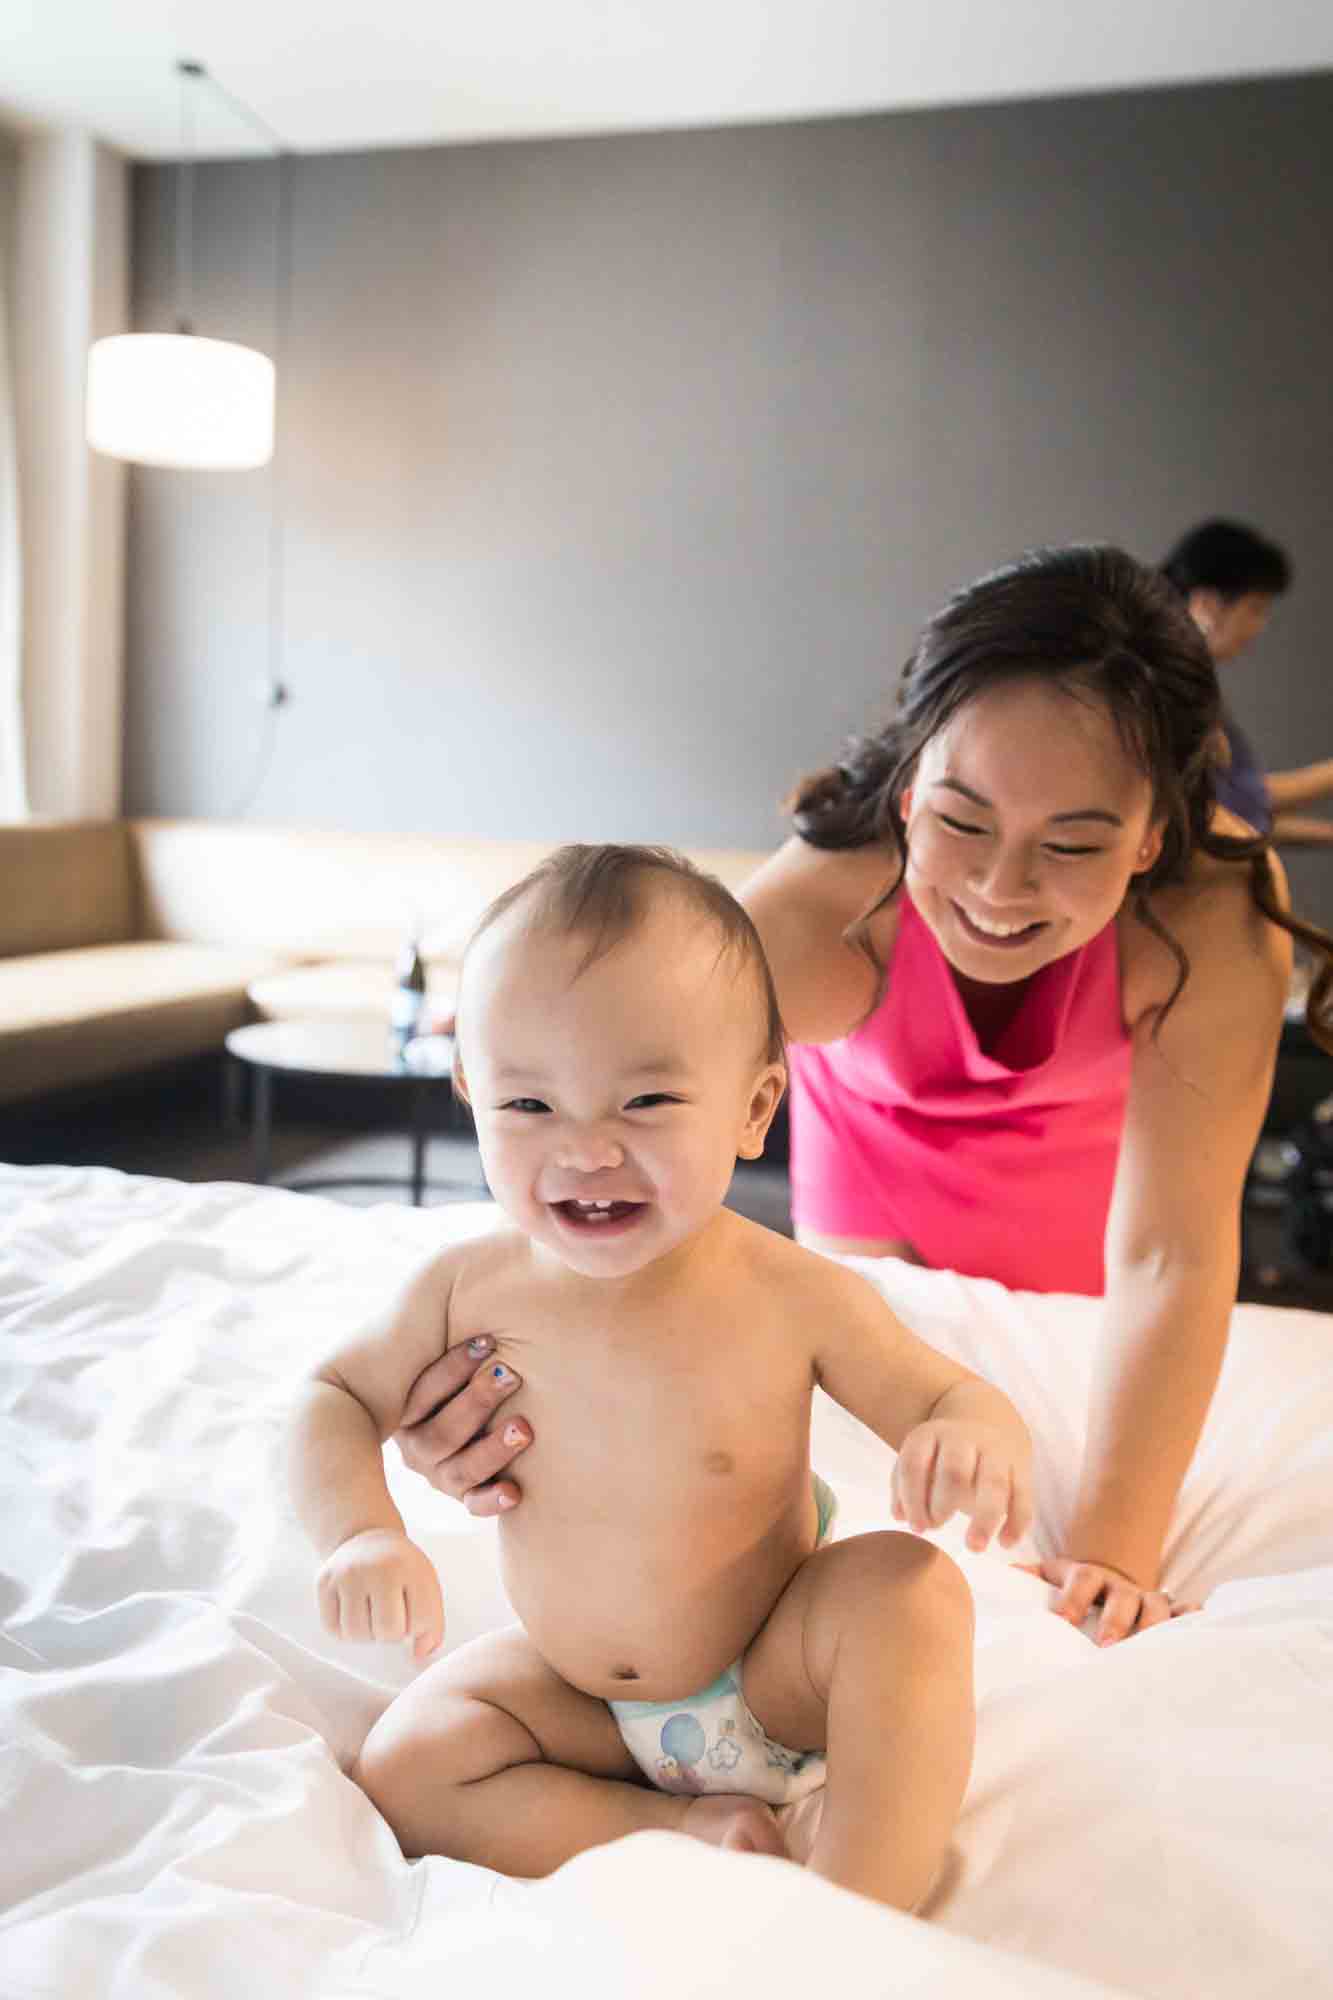 Mother grabbing naked baby sitting on bed